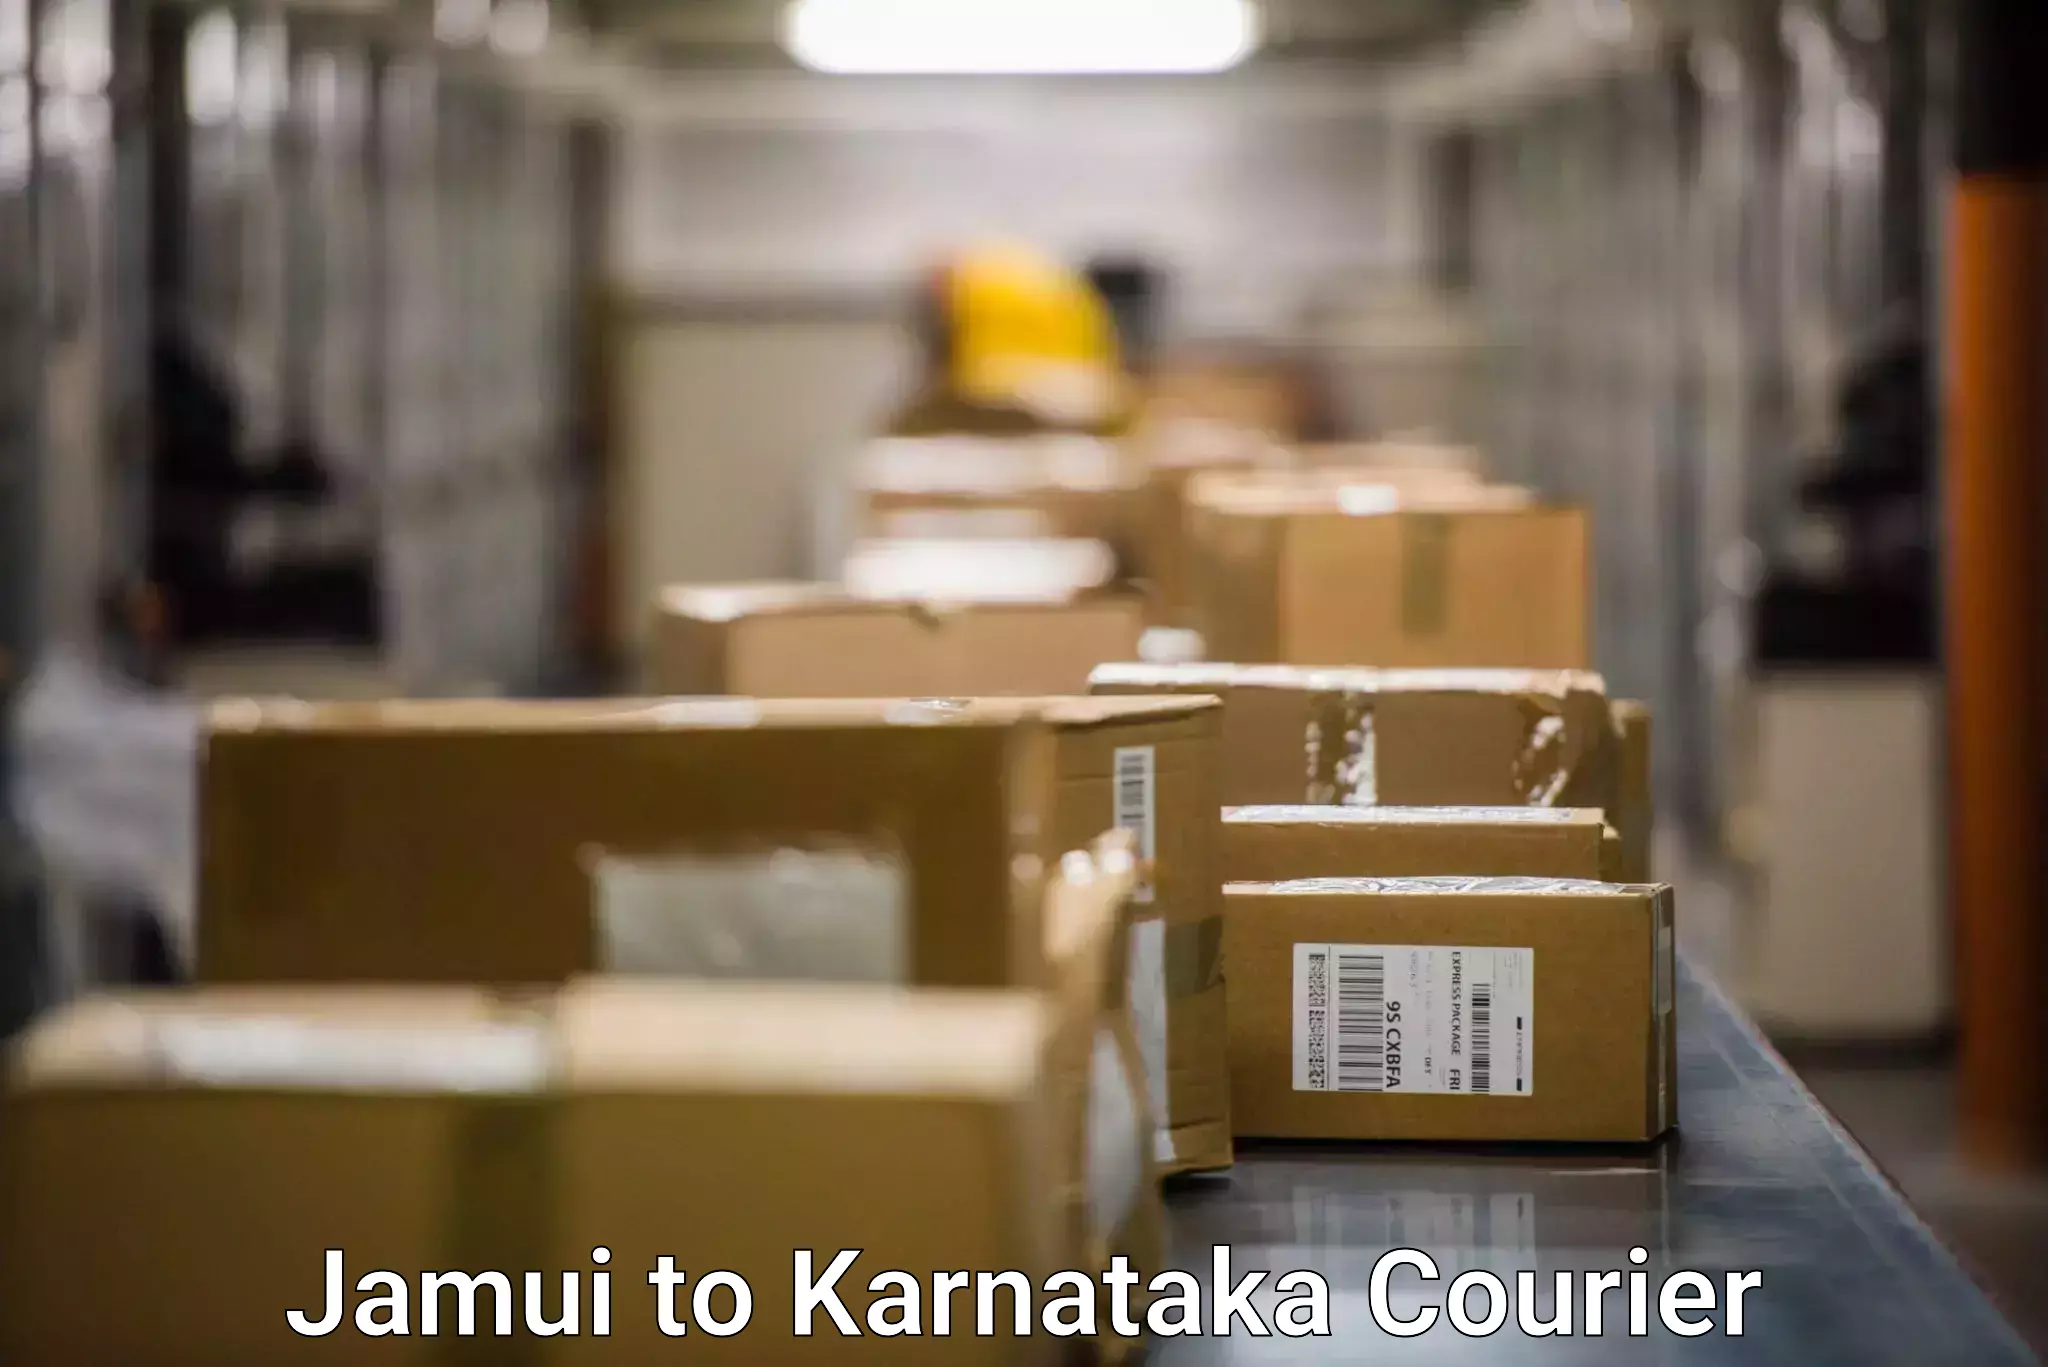 Efficient order fulfillment Jamui to Turuvekere